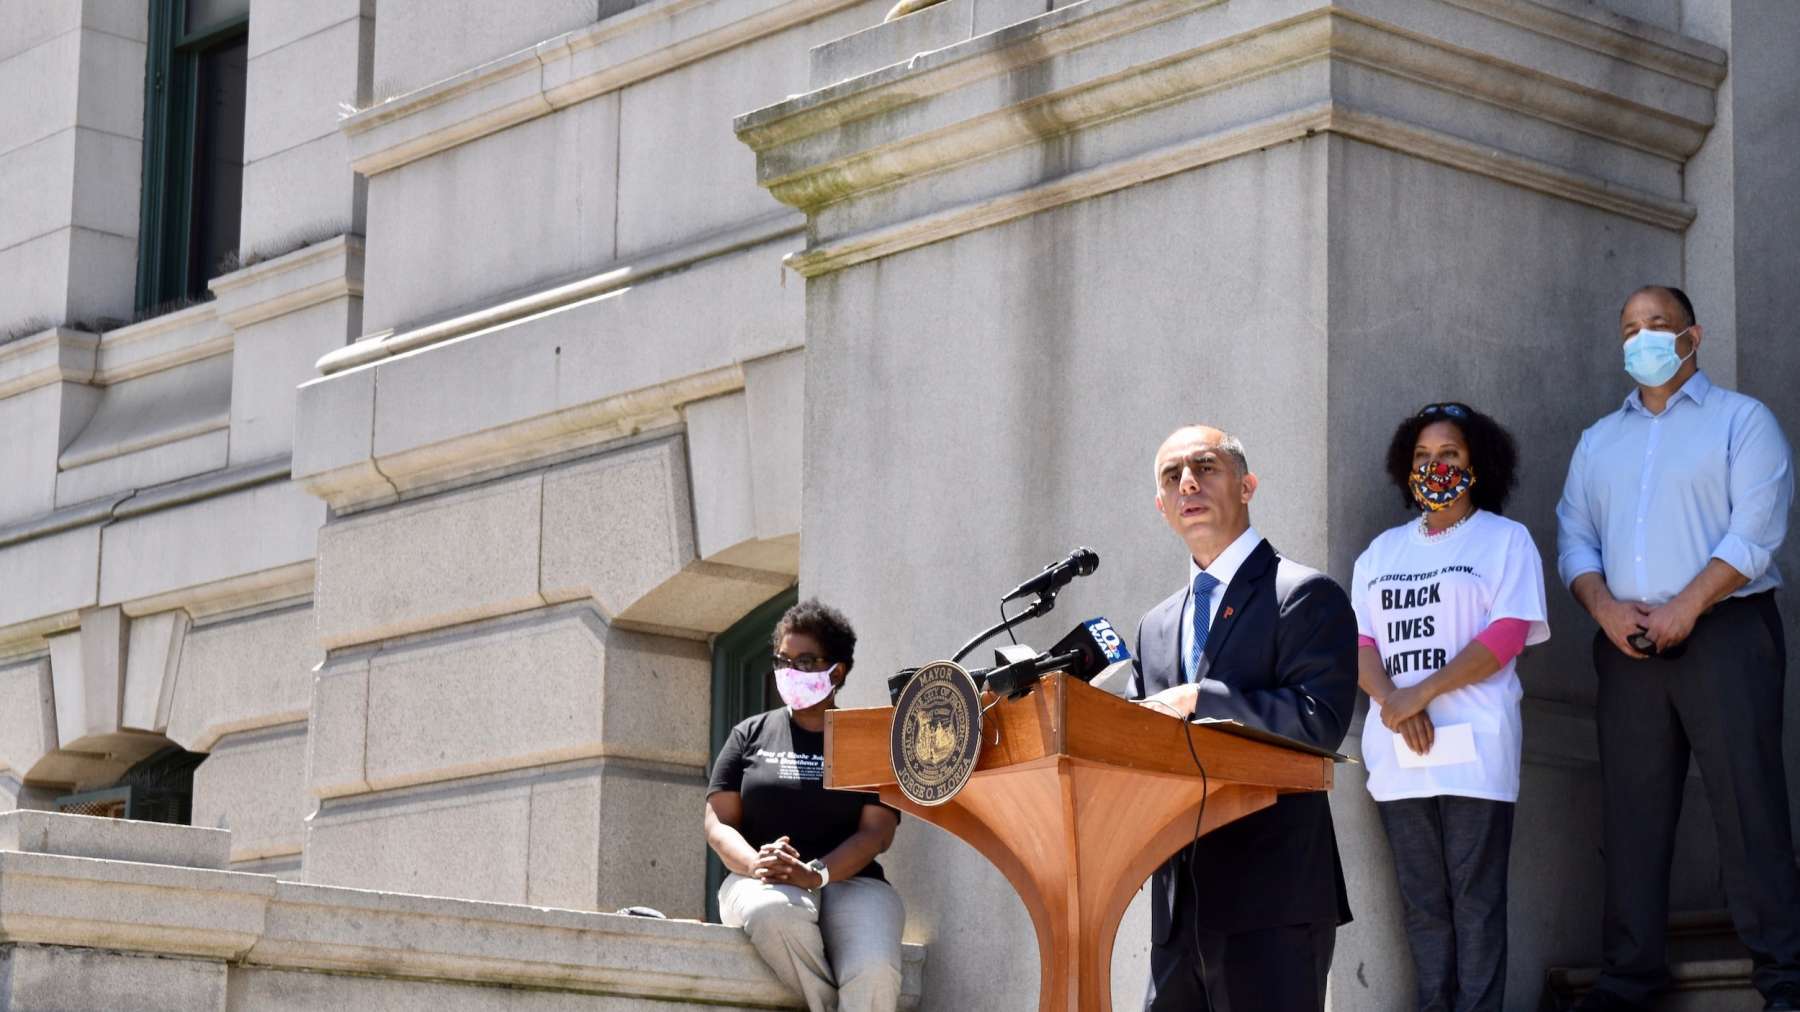 Mayor Elorza announces removal of “Plantations” from city documents and oath ceremonies